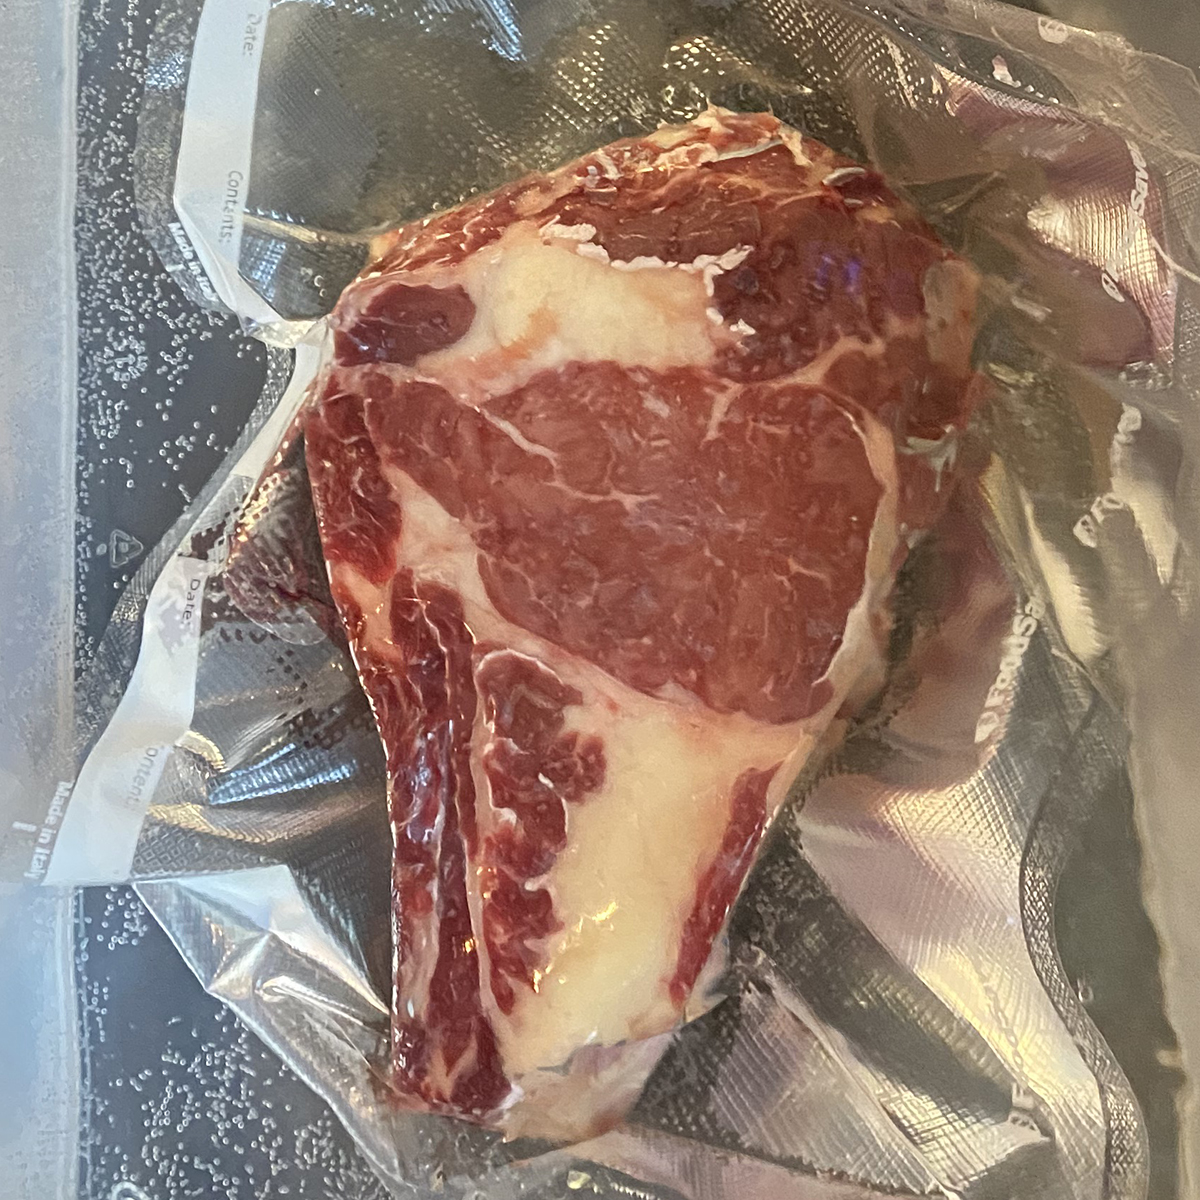  costata angus sous vide immersione